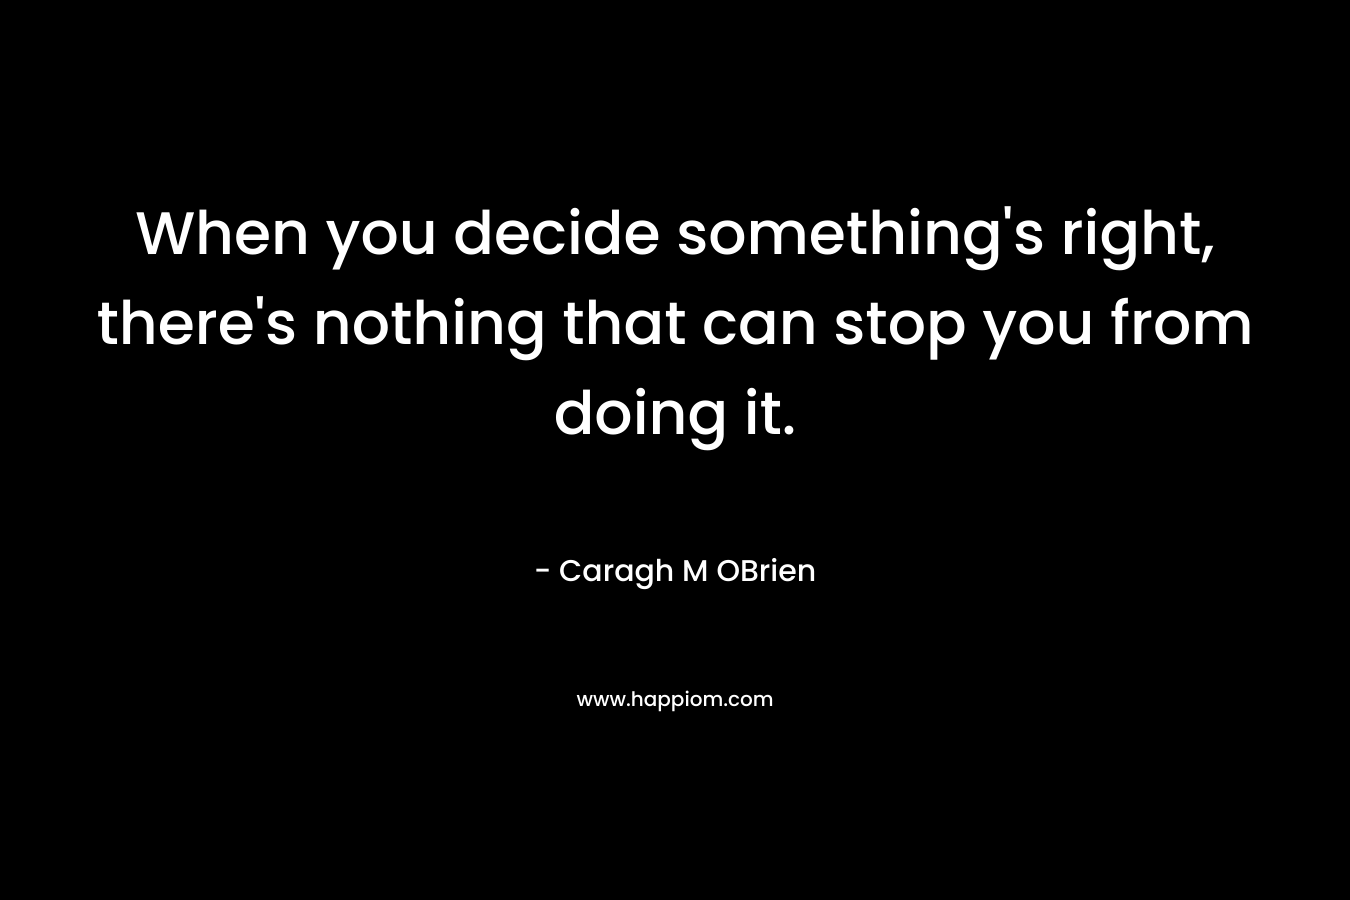 When you decide something’s right, there’s nothing that can stop you from doing it. – Caragh M OBrien